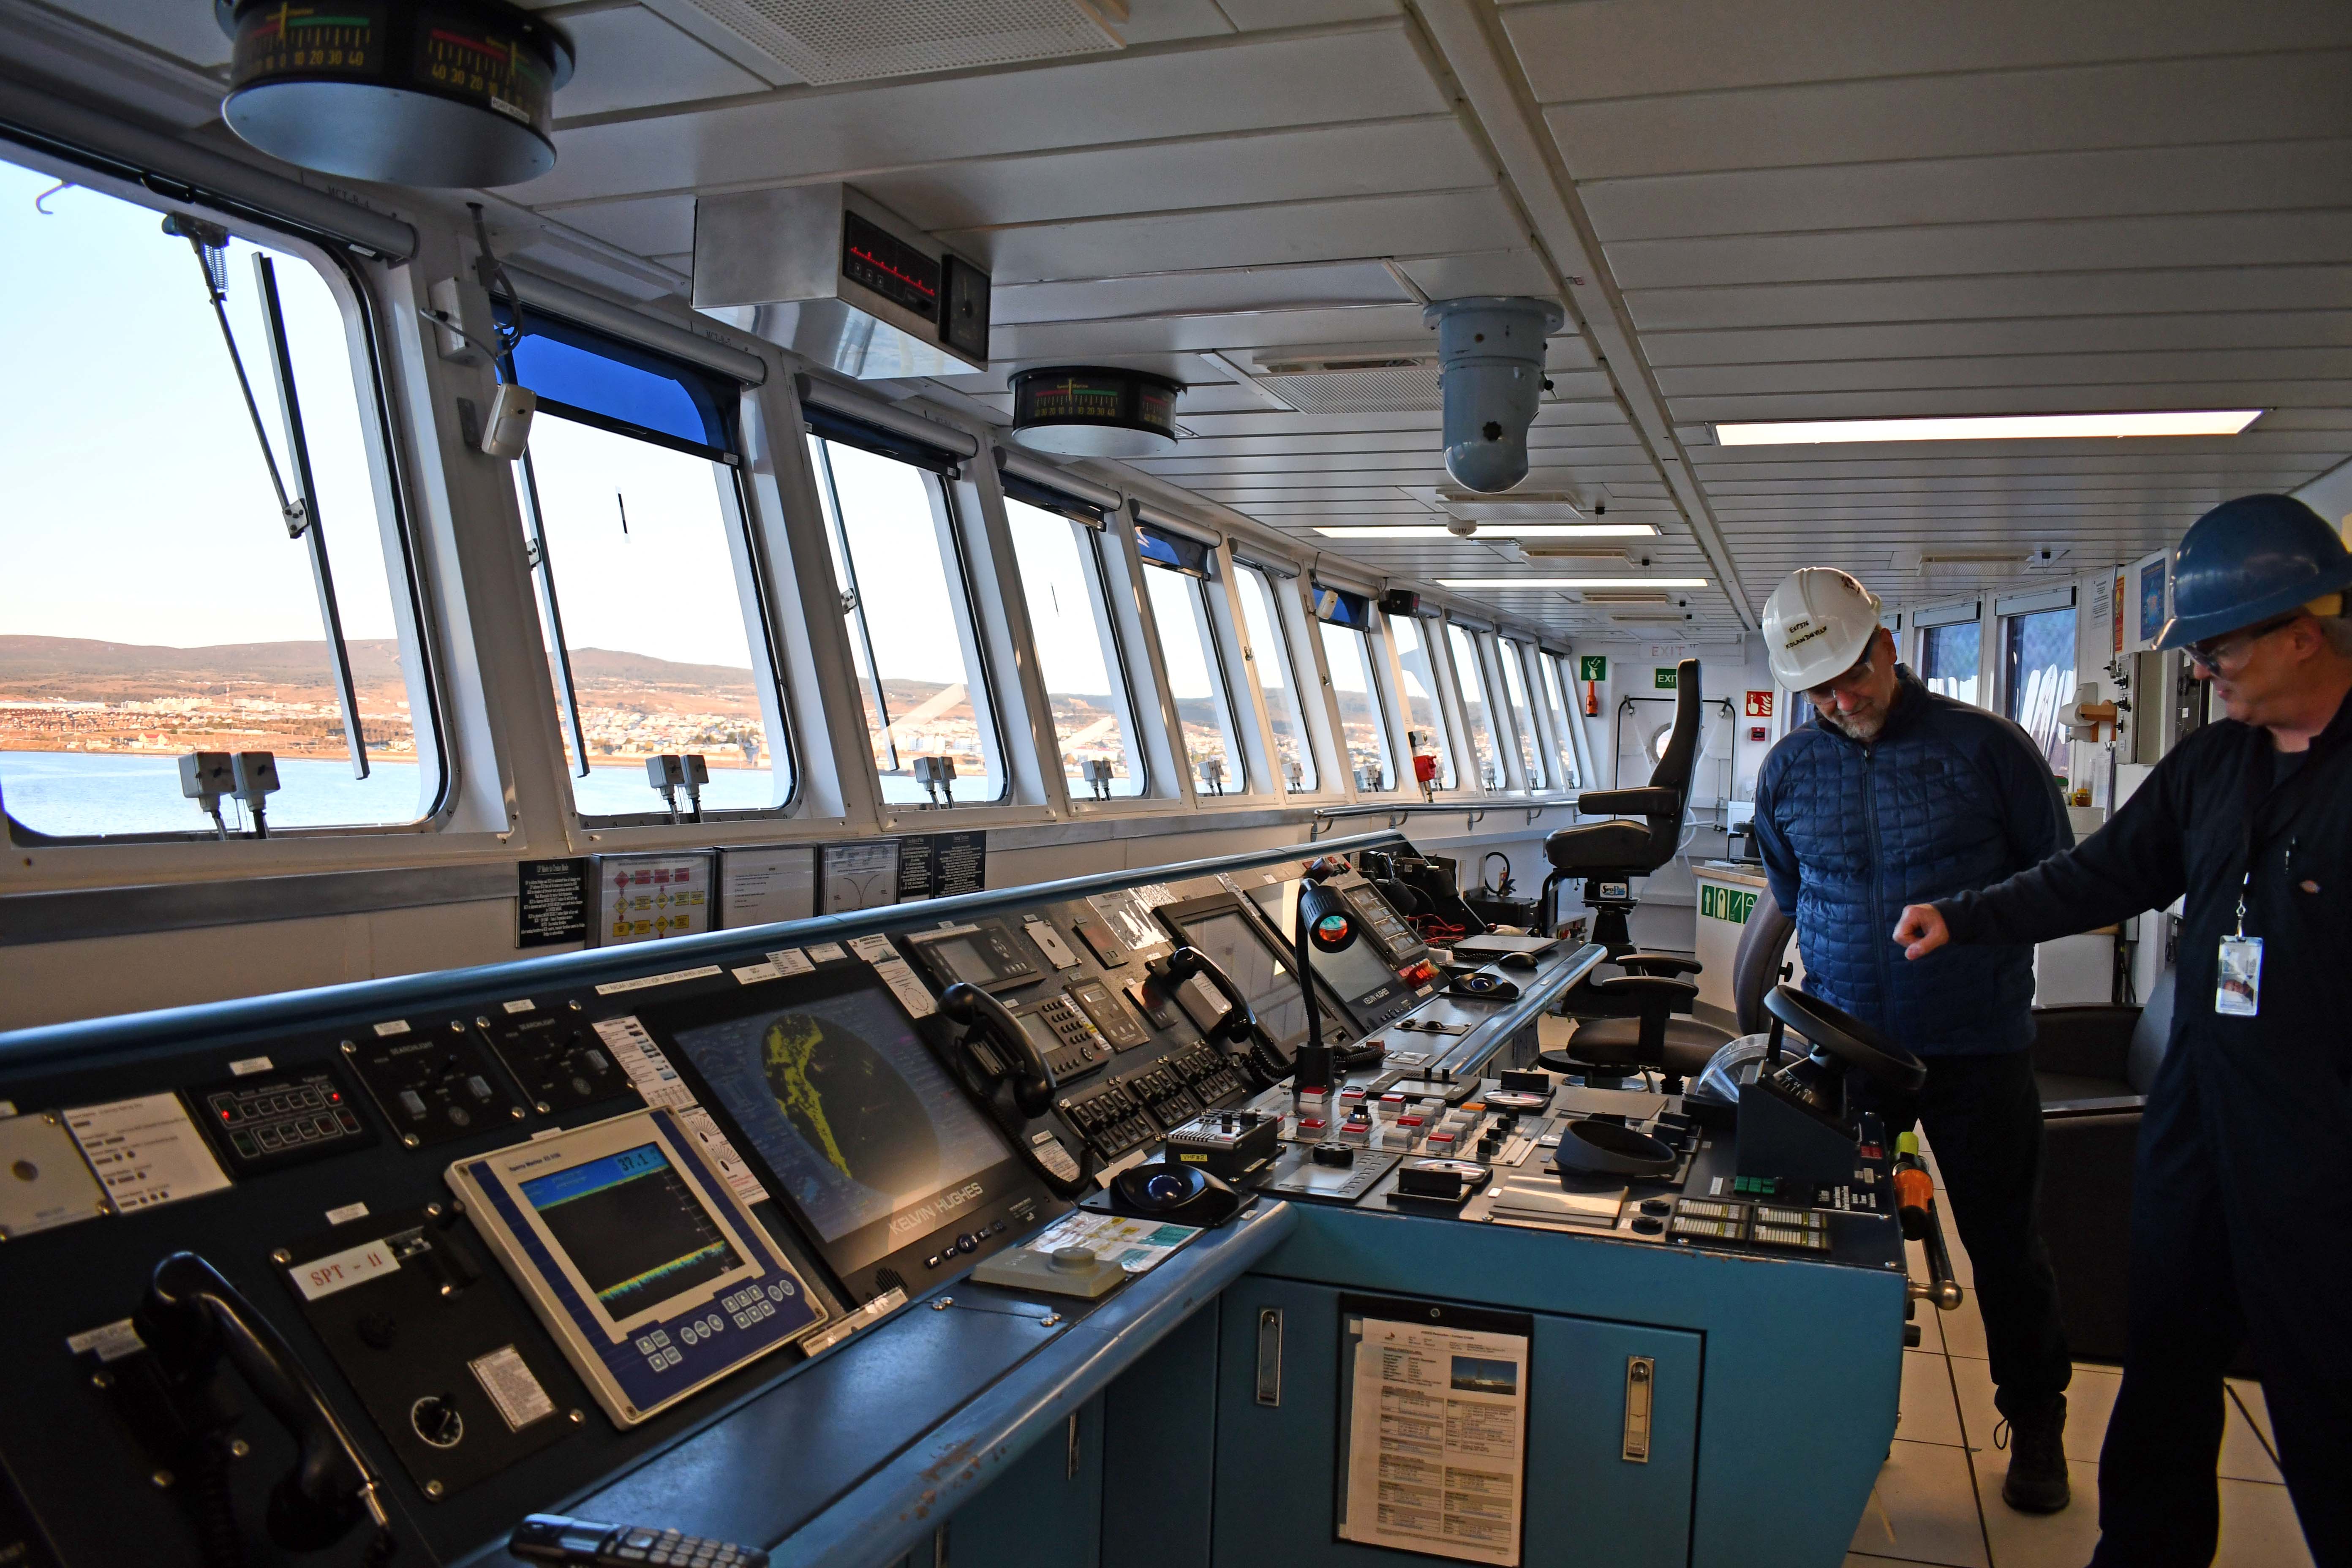 Two men in hardhats look at the instruments on the ship's bridge